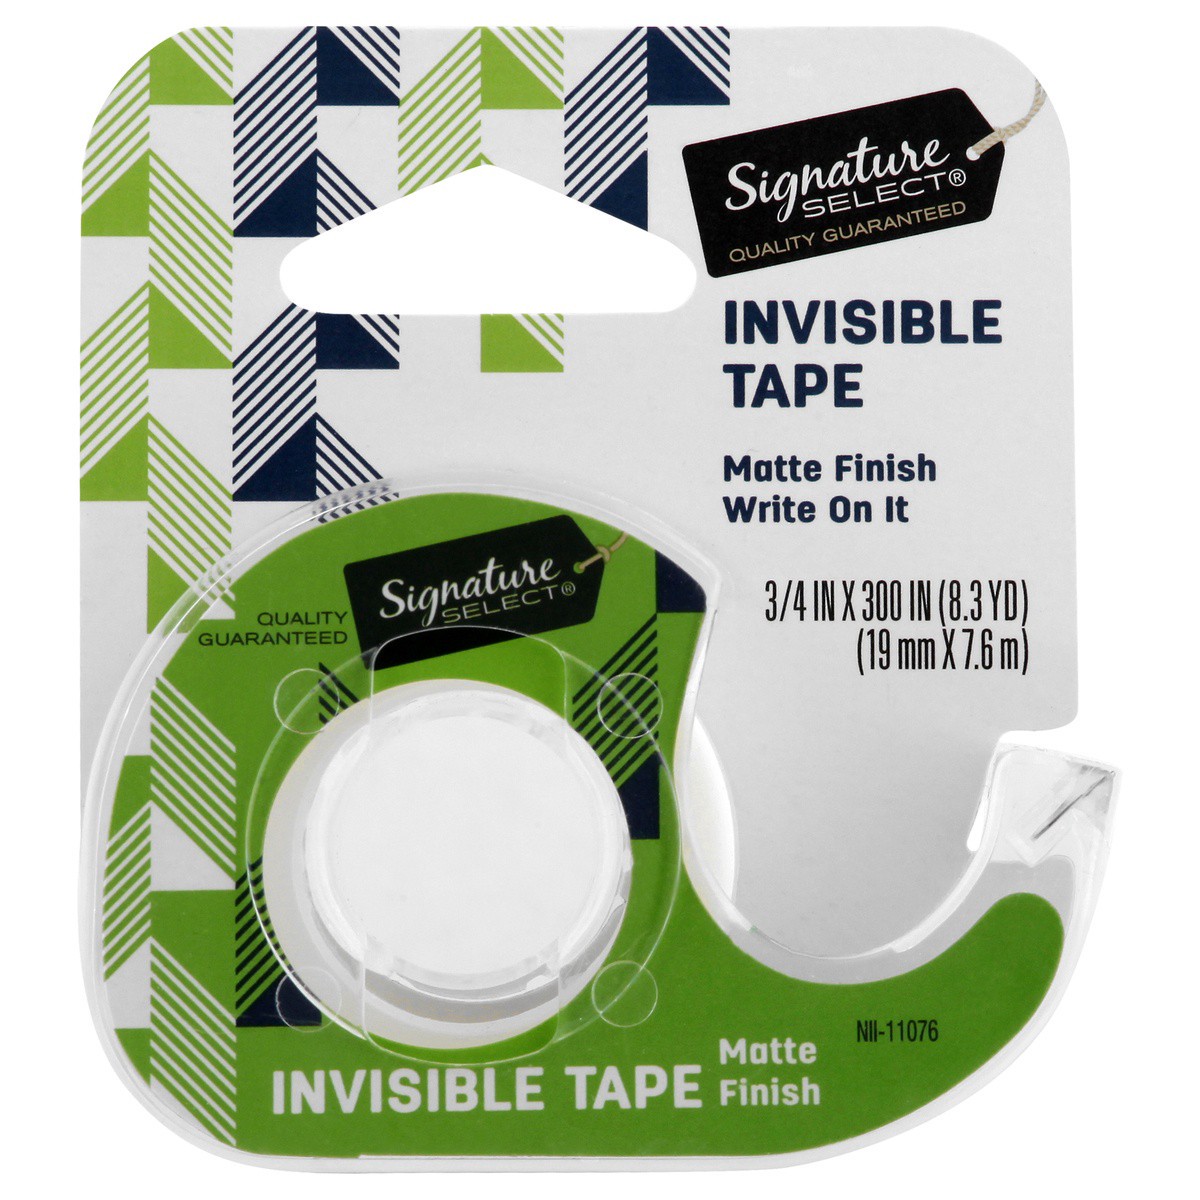 slide 1 of 7, Signature Home Tape Invisible Matte Finish 3/4 IN X 300 IN, 1 ct